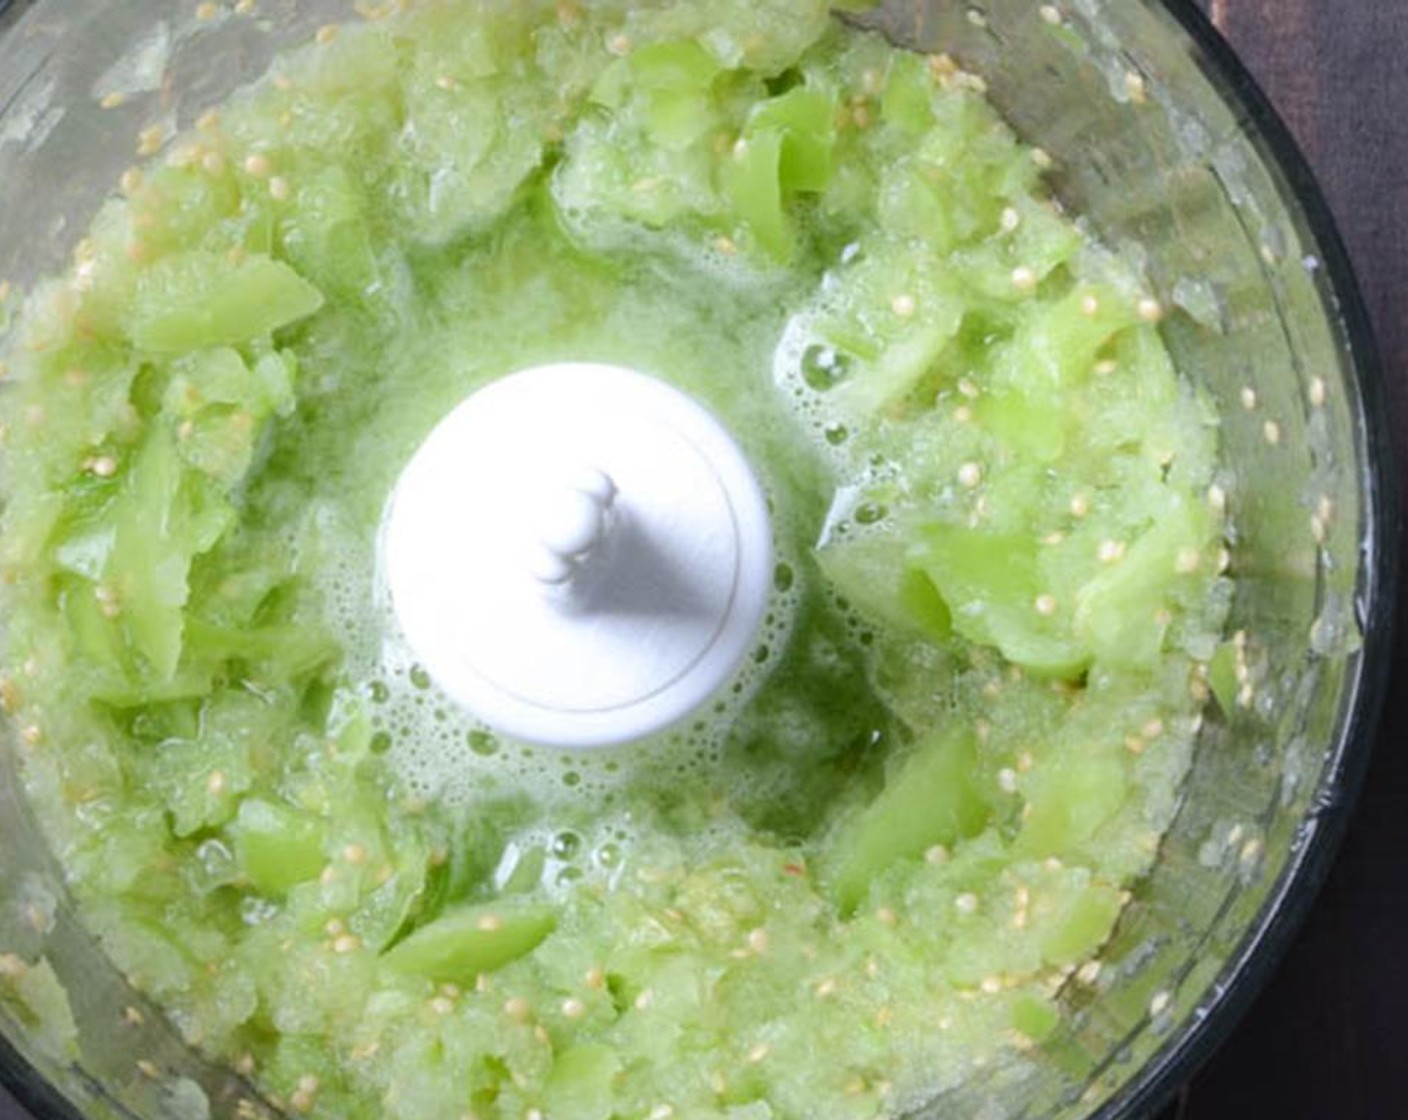 step 2 Add the Tomatillos (8 oz) to a small food processor and pulse several times until finely chopped. Set aside.